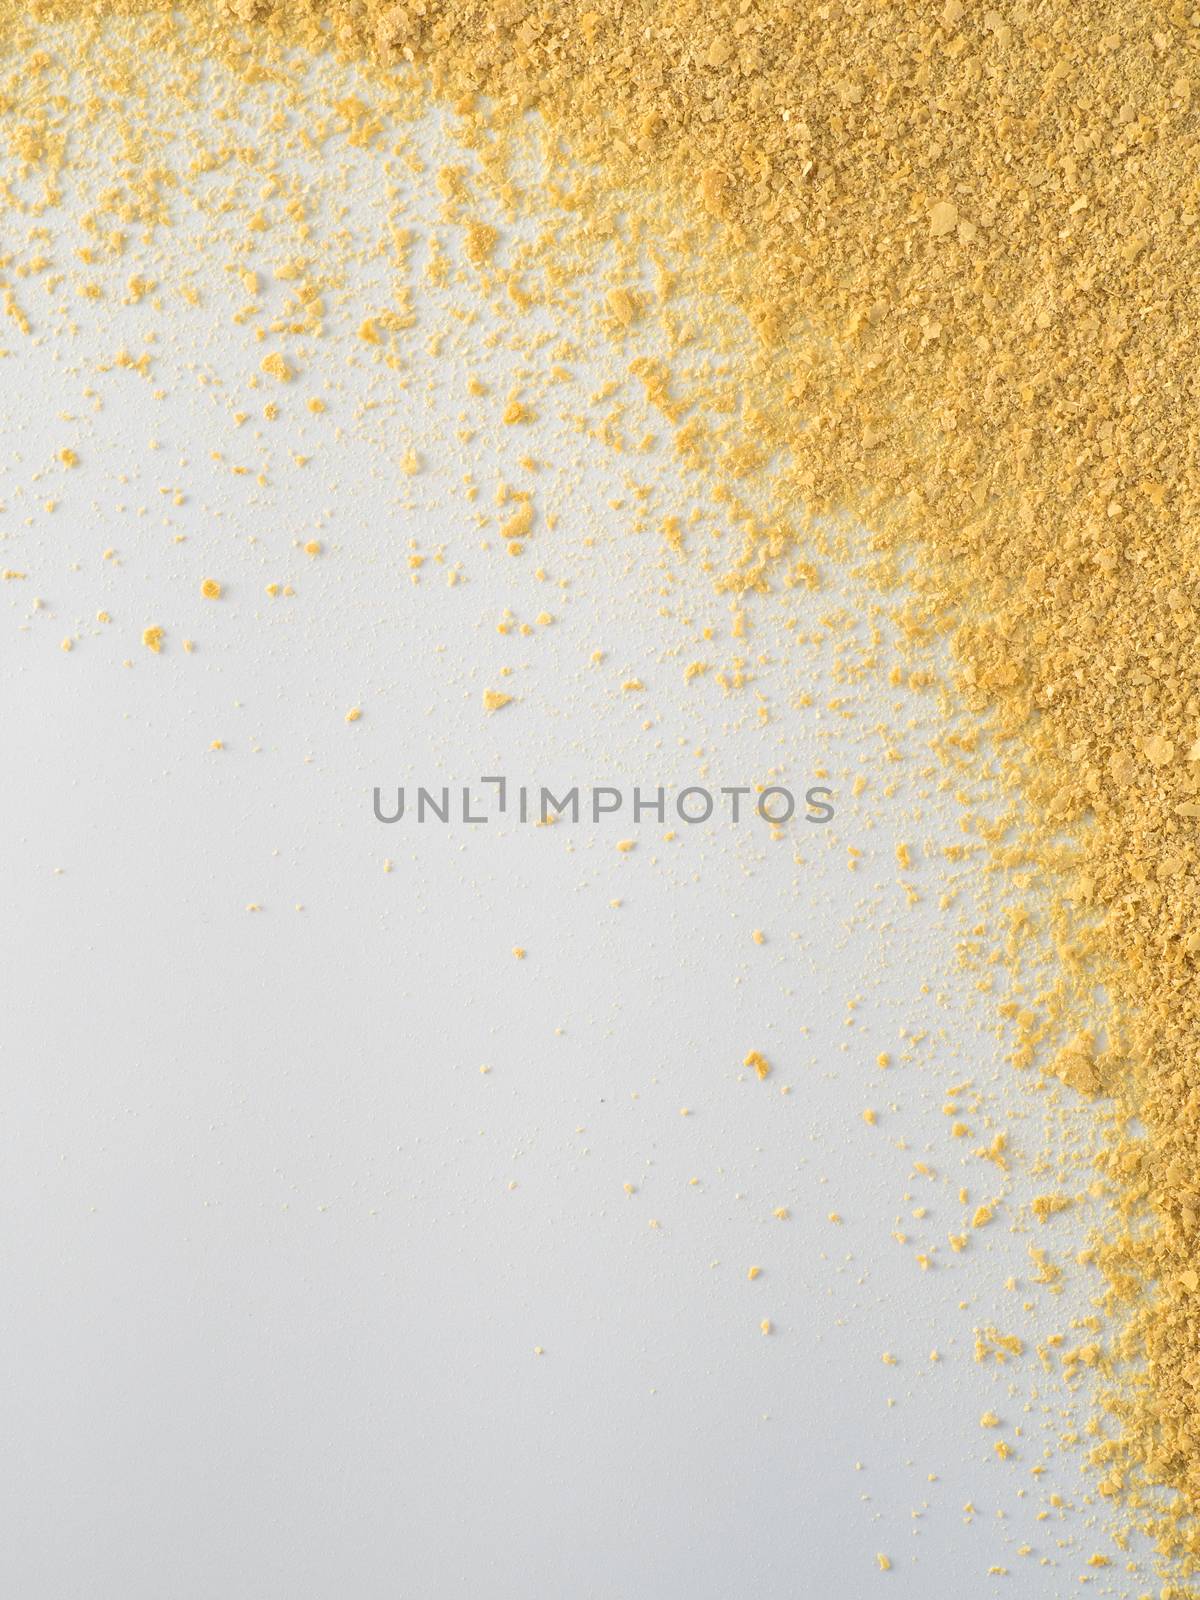 Nutritional yeast on white background. Nutritional inactive yeast top view. Copy space. Nutritional yeast is vegetarian superfood with cheese flavor, for healthy diet. Vertical.